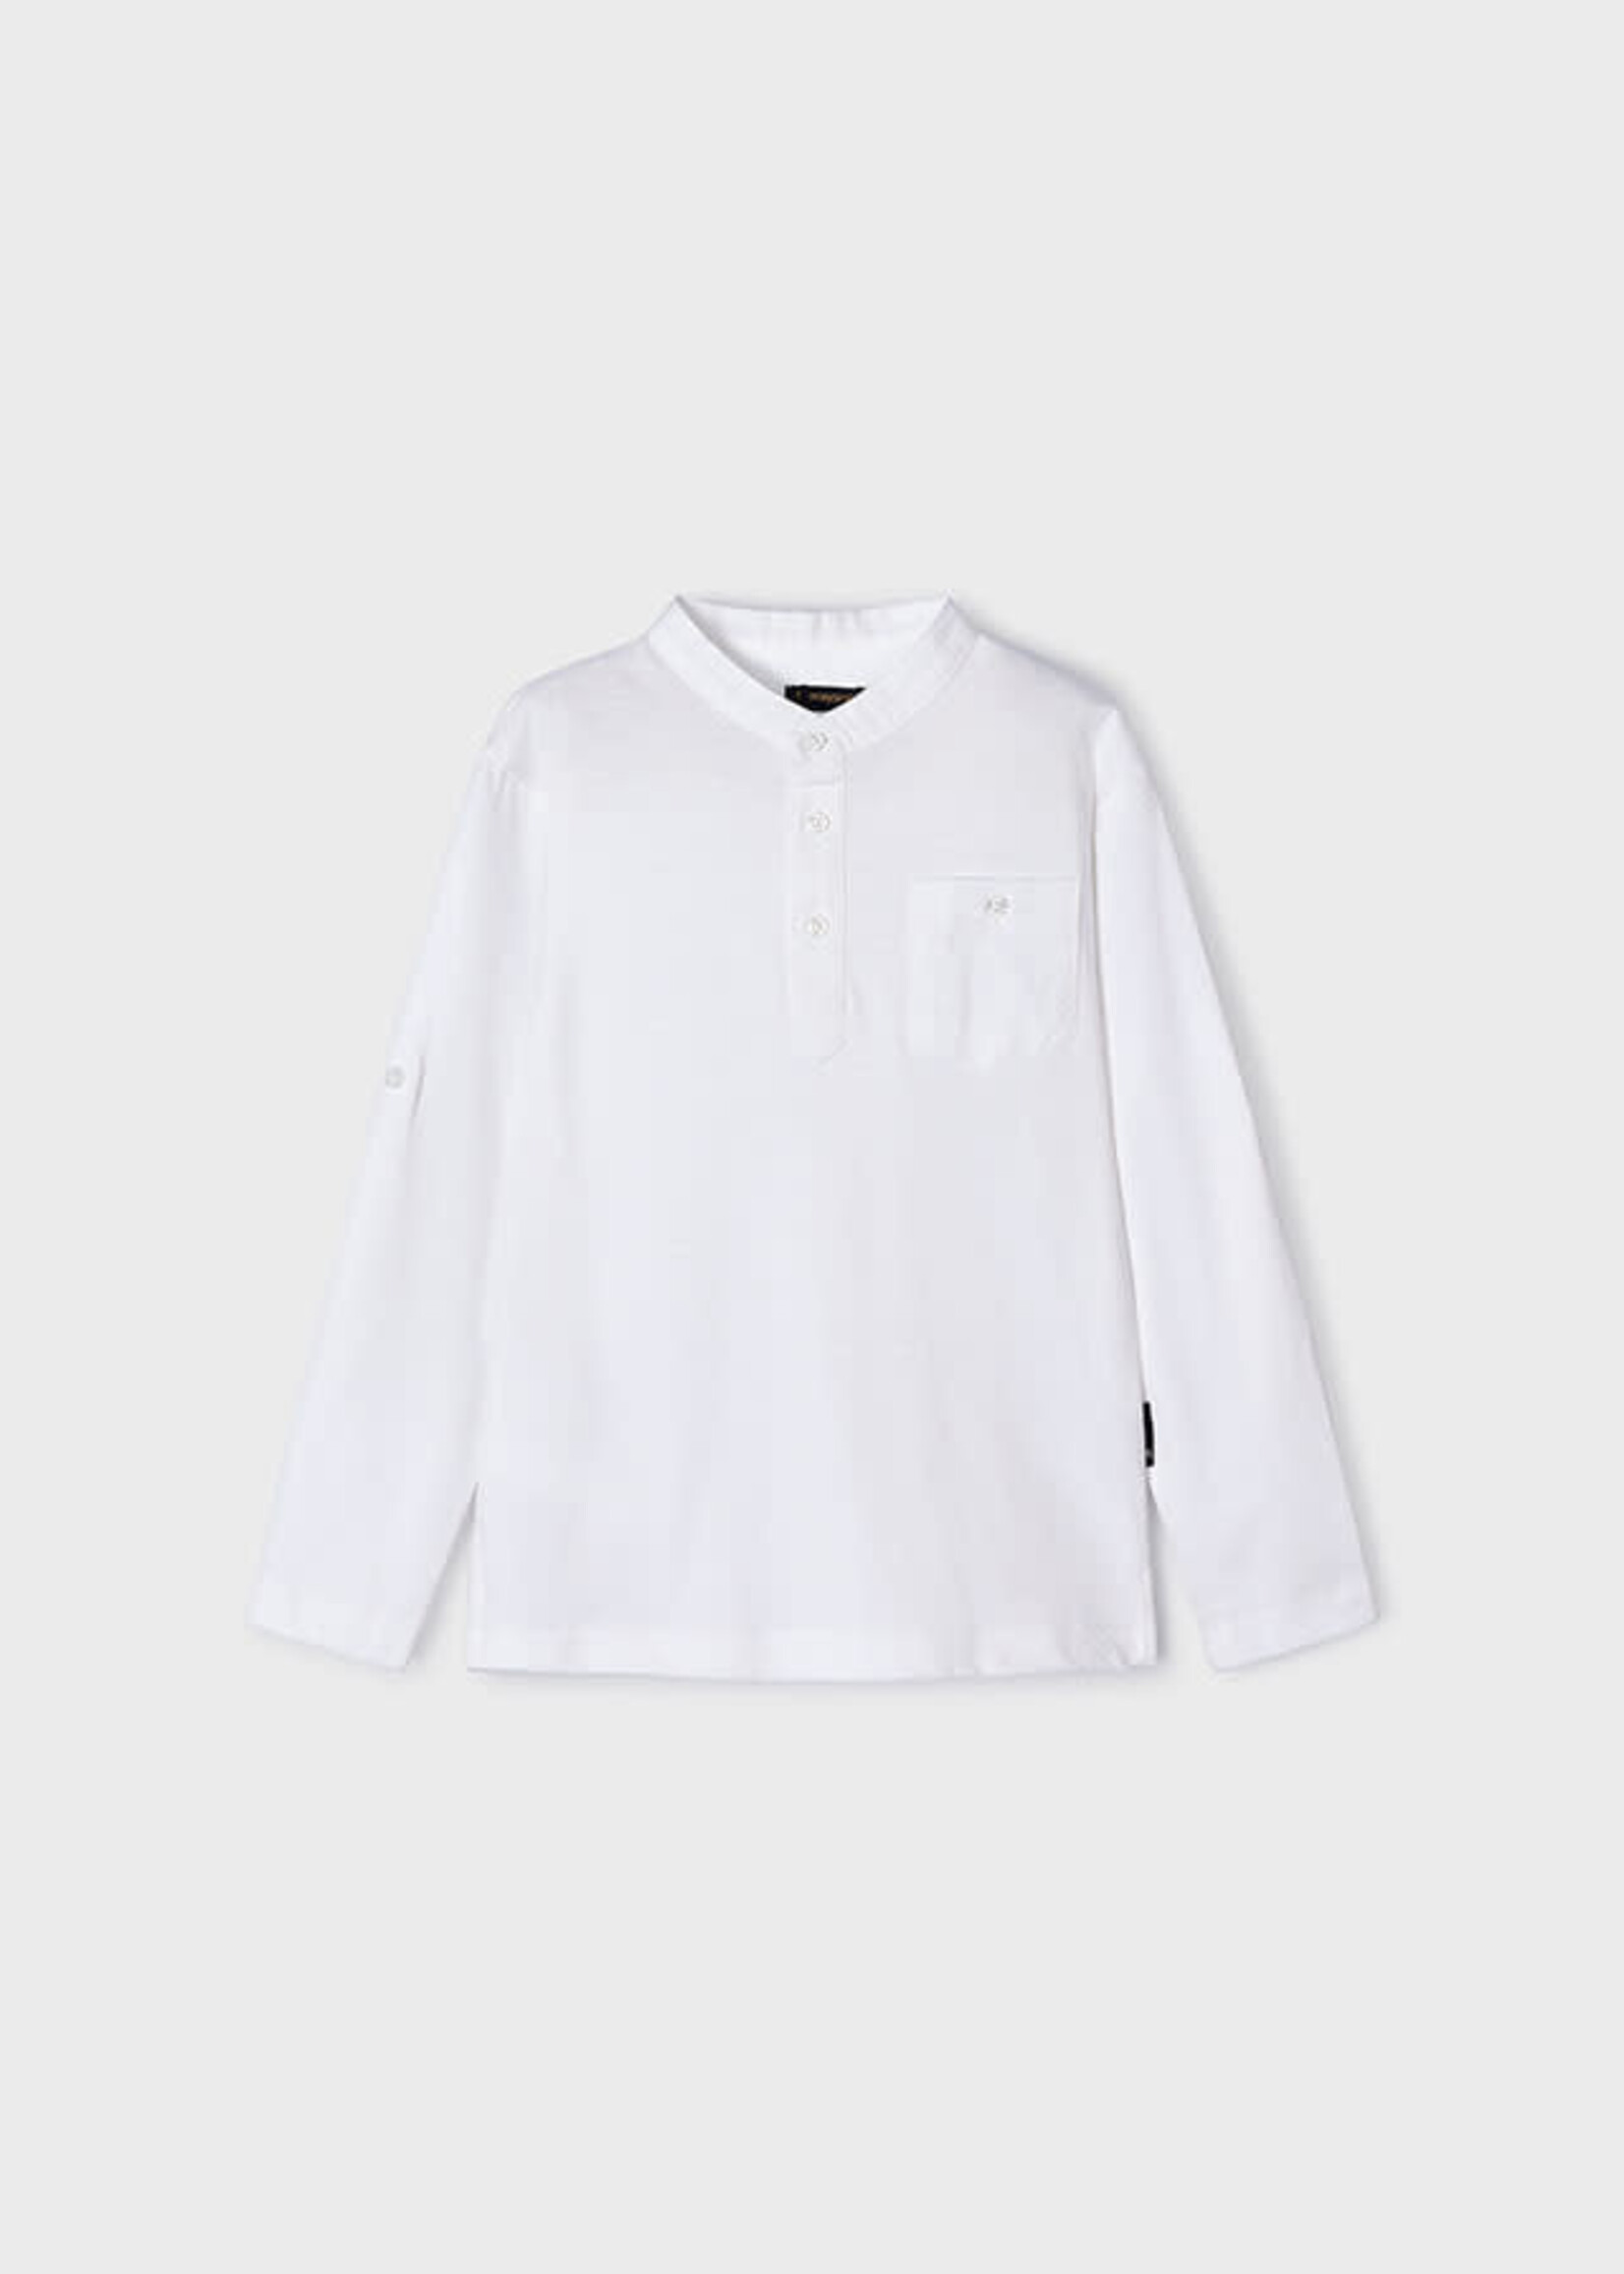 Mayoral Mayoral L/s mao-collar polo shirt White - 24 03181